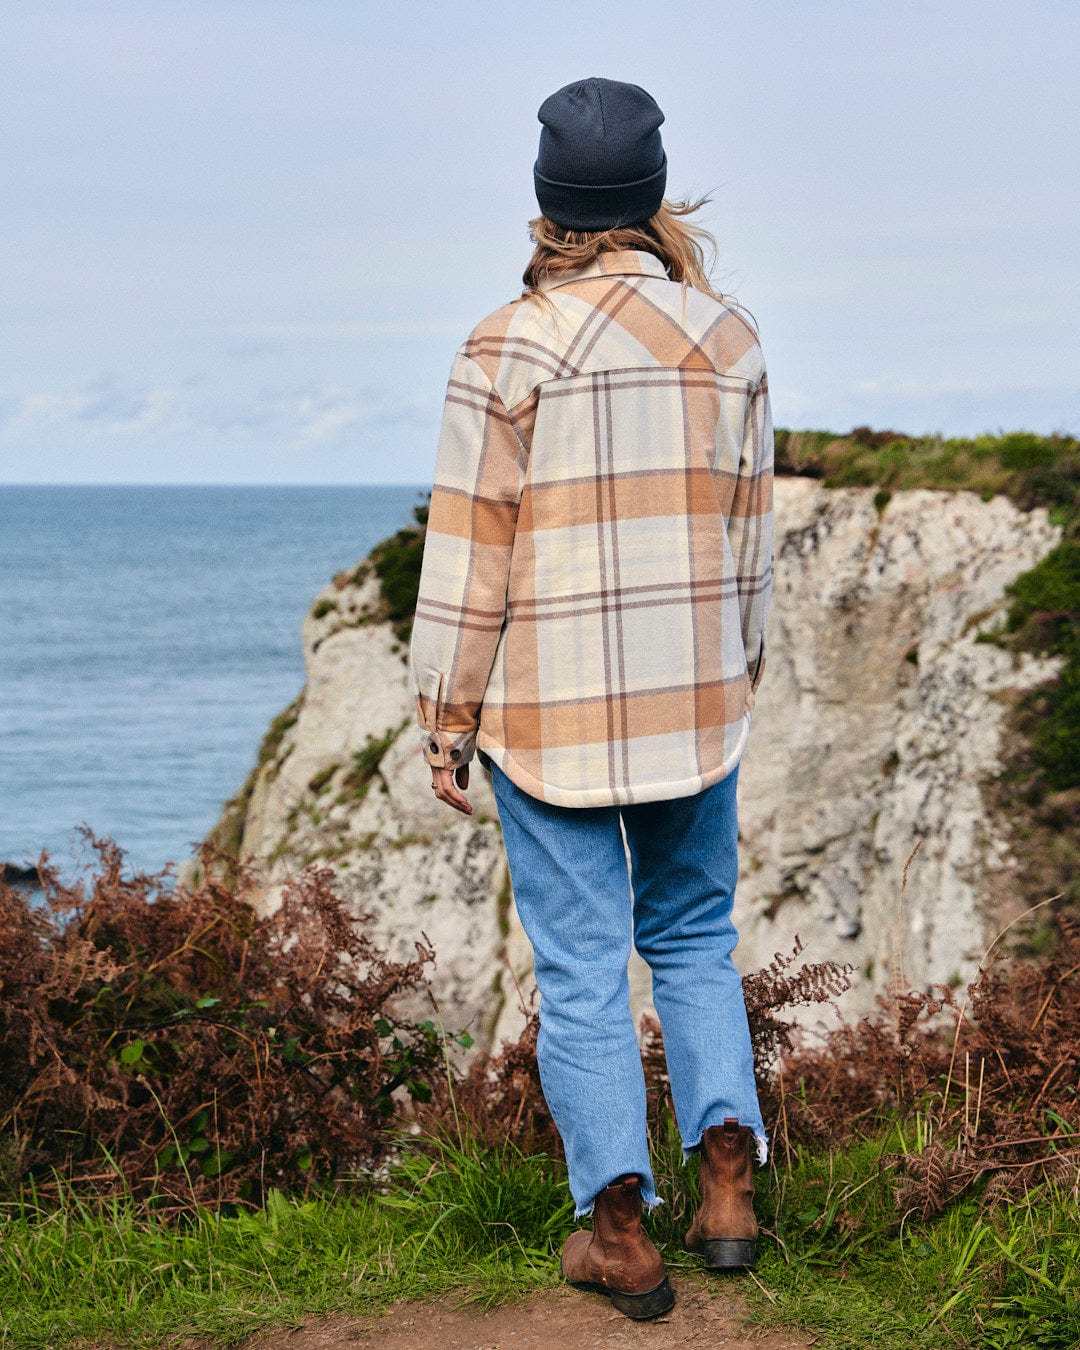 A man standing on a cliff overlooking the ocean wearing a Saltrock Stella - Womens Checked Borg Lined Shacket - Cream with buttoned cuffs plaid shirt.